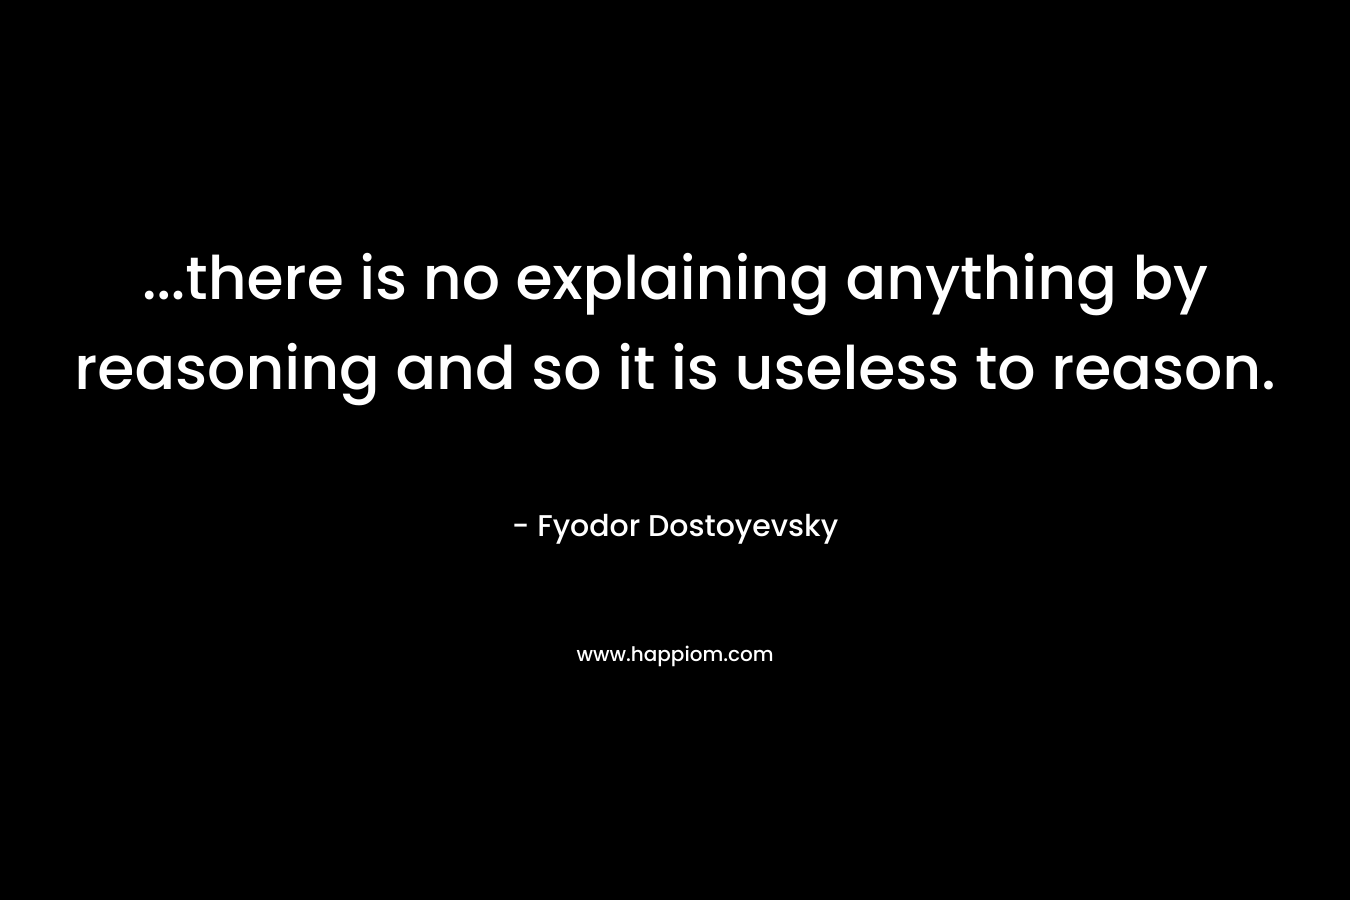 ...there is no explaining anything by reasoning and so it is useless to reason.